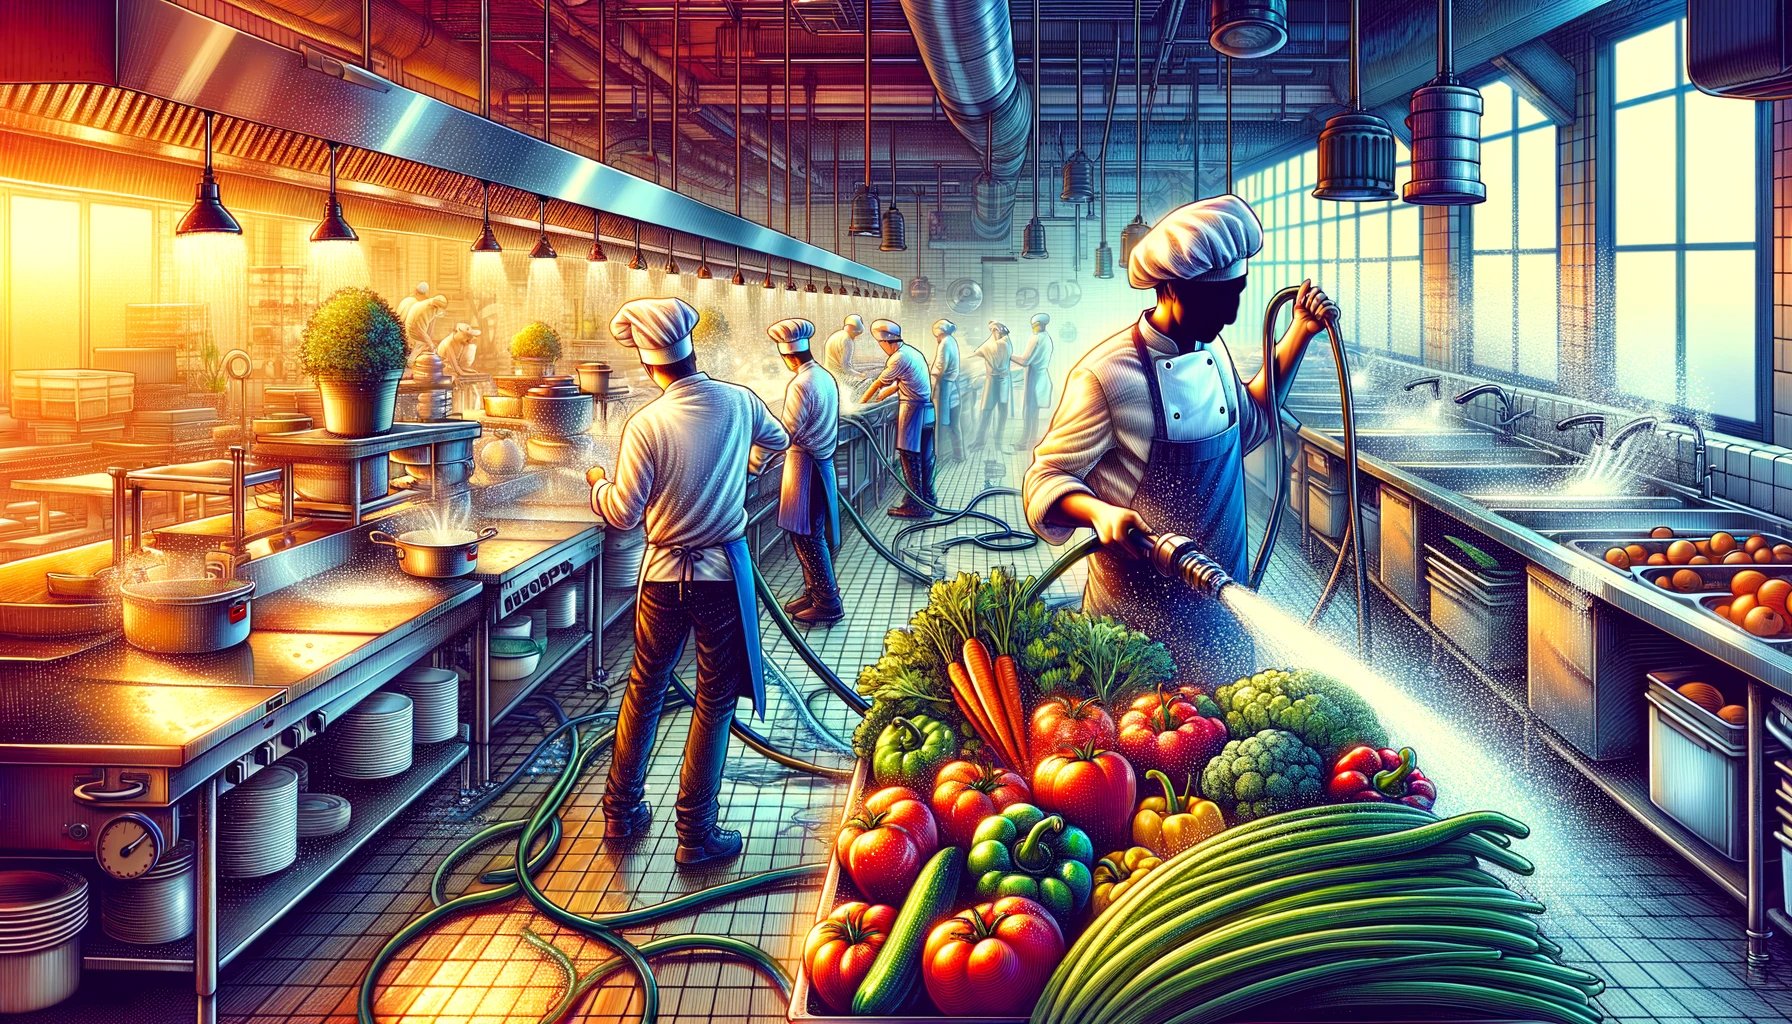 DALL·E 2024-03-21 09.37.34 - A vibrant and bustling food service setting, such as a restaurant kitchen, where chefs and kitchen staff use water hoses to quickly clean vegetables a